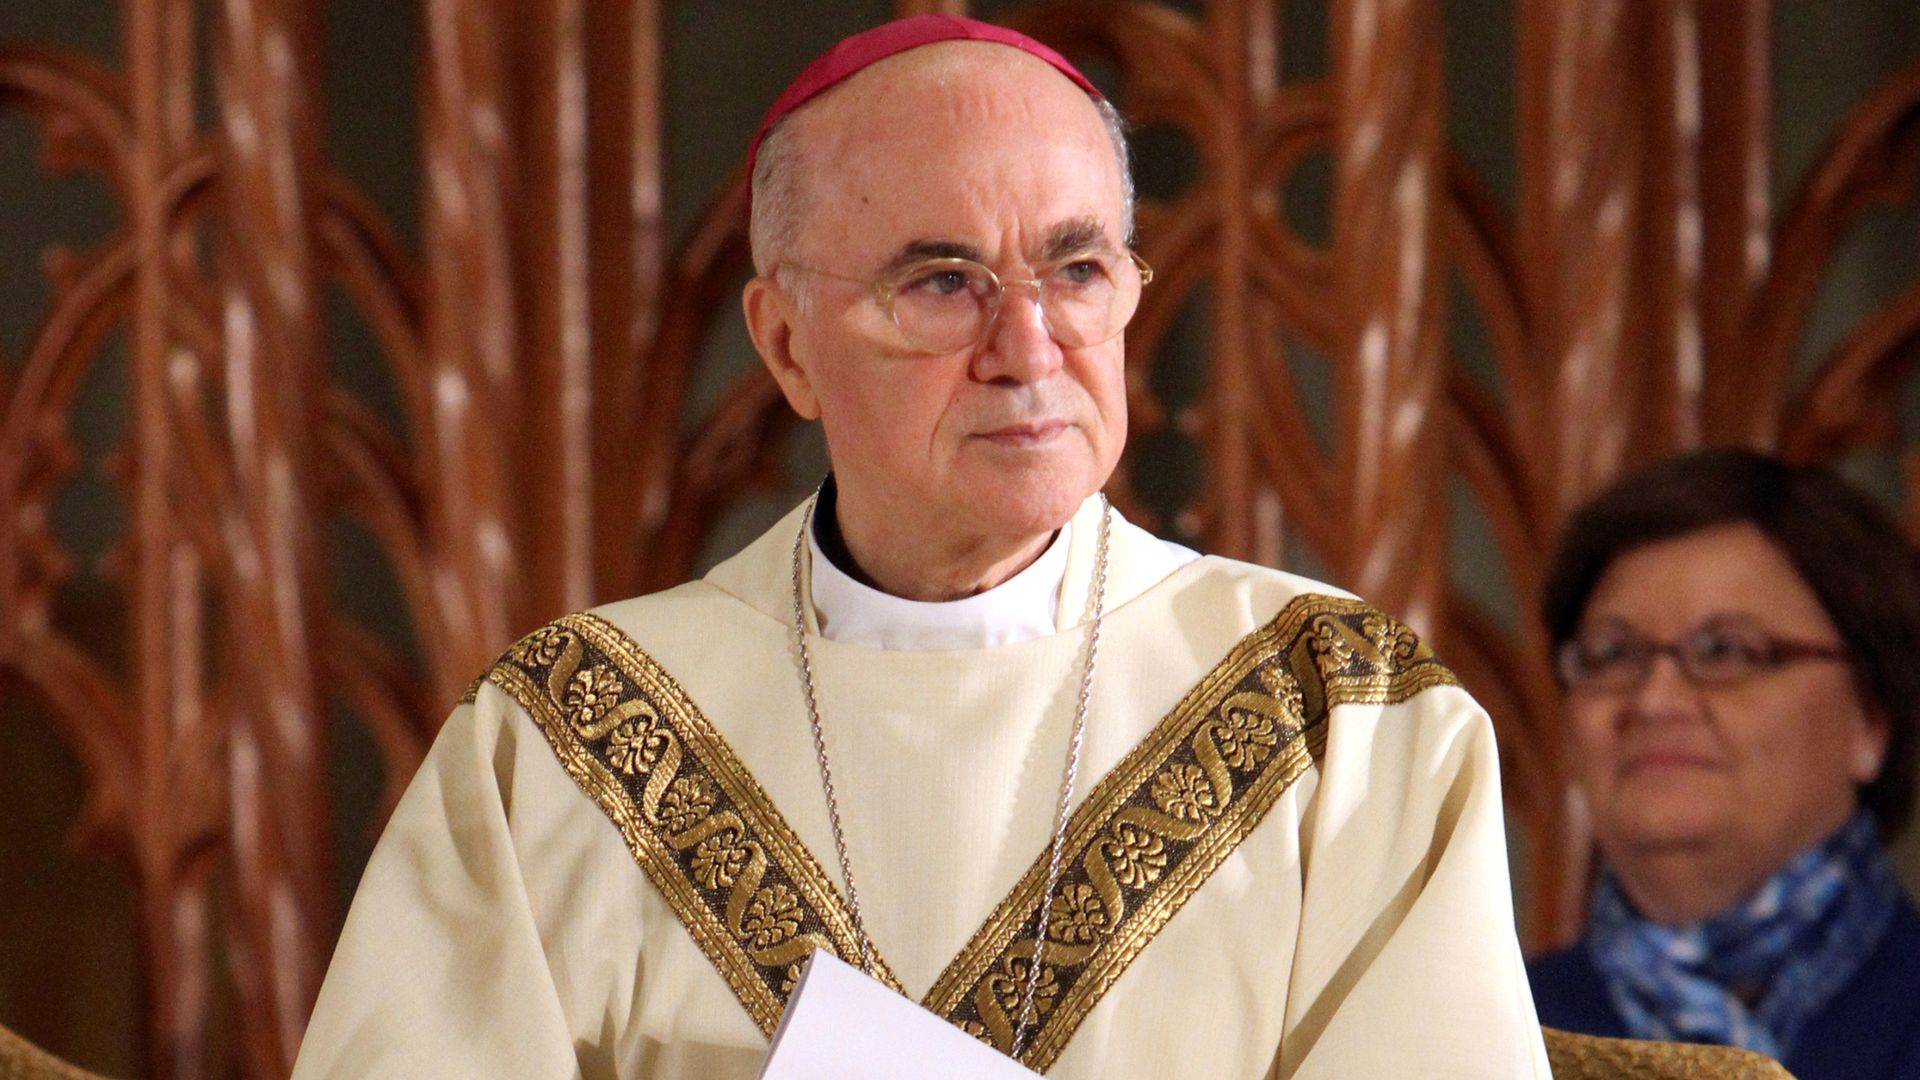 Archbishop brands Pope 'servant of Satan' - and gets banished by the Vatican